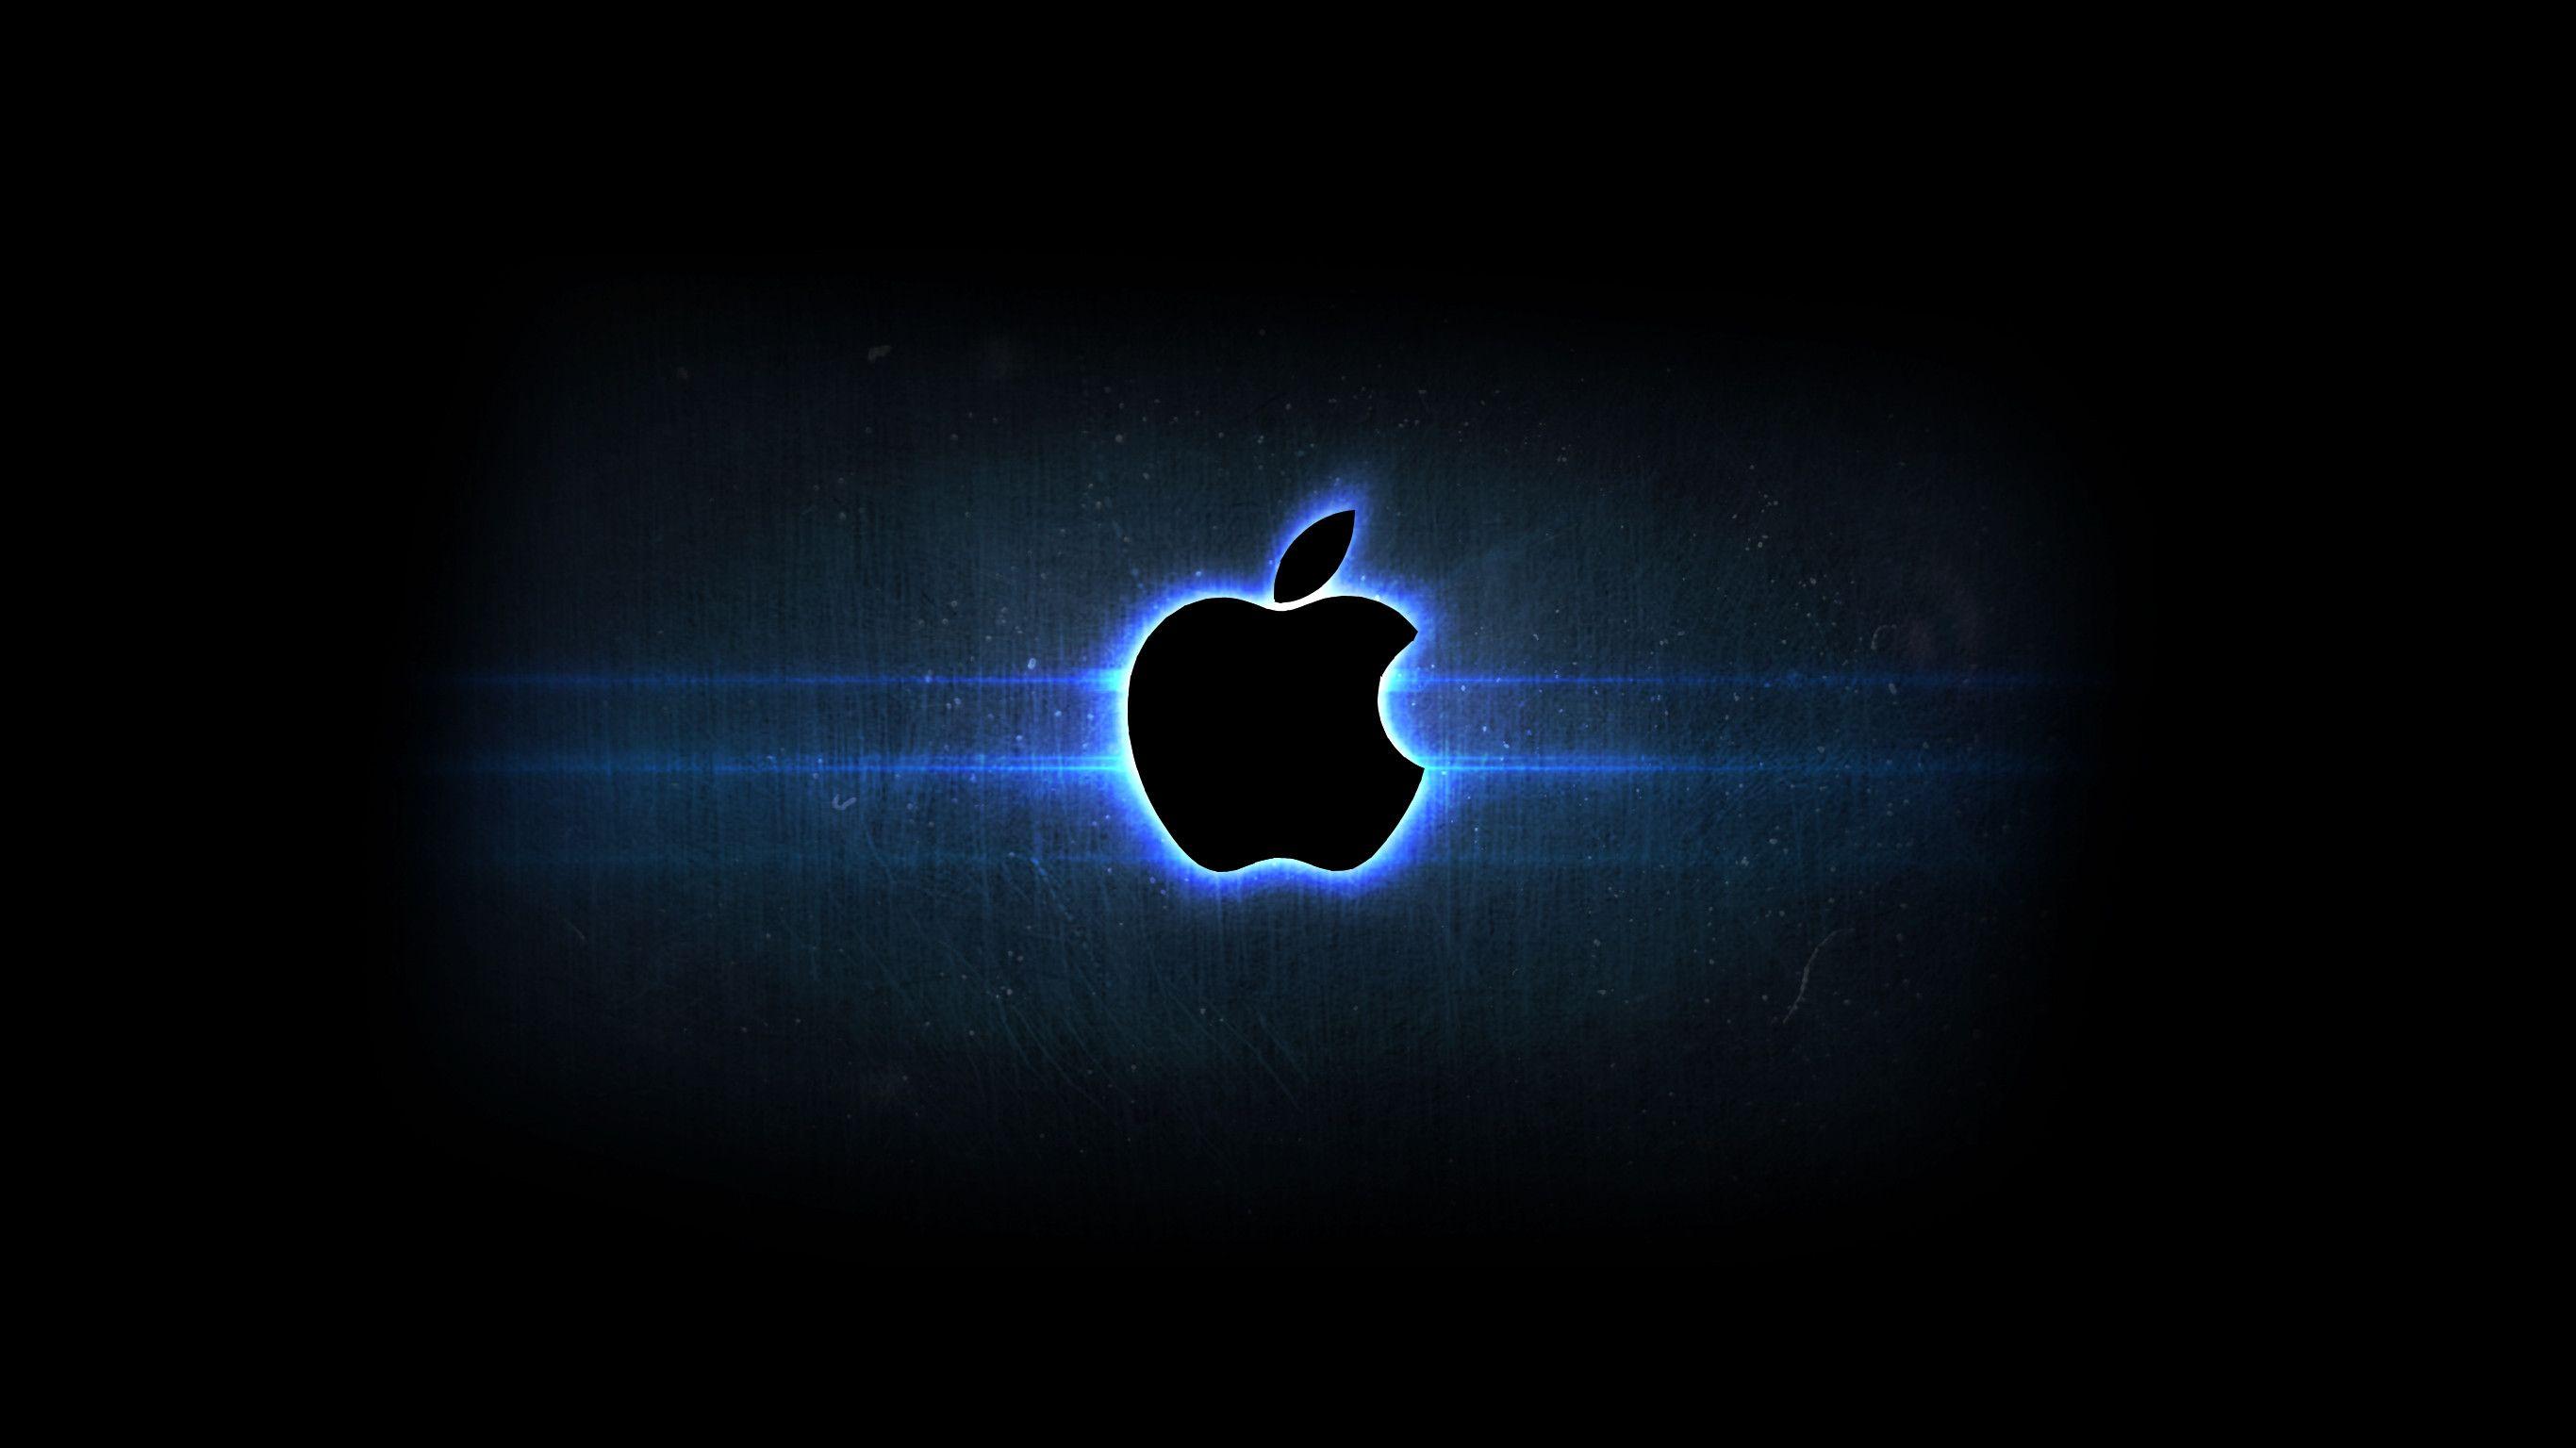 Apple Backgrounds Image - Wallpaper Cave